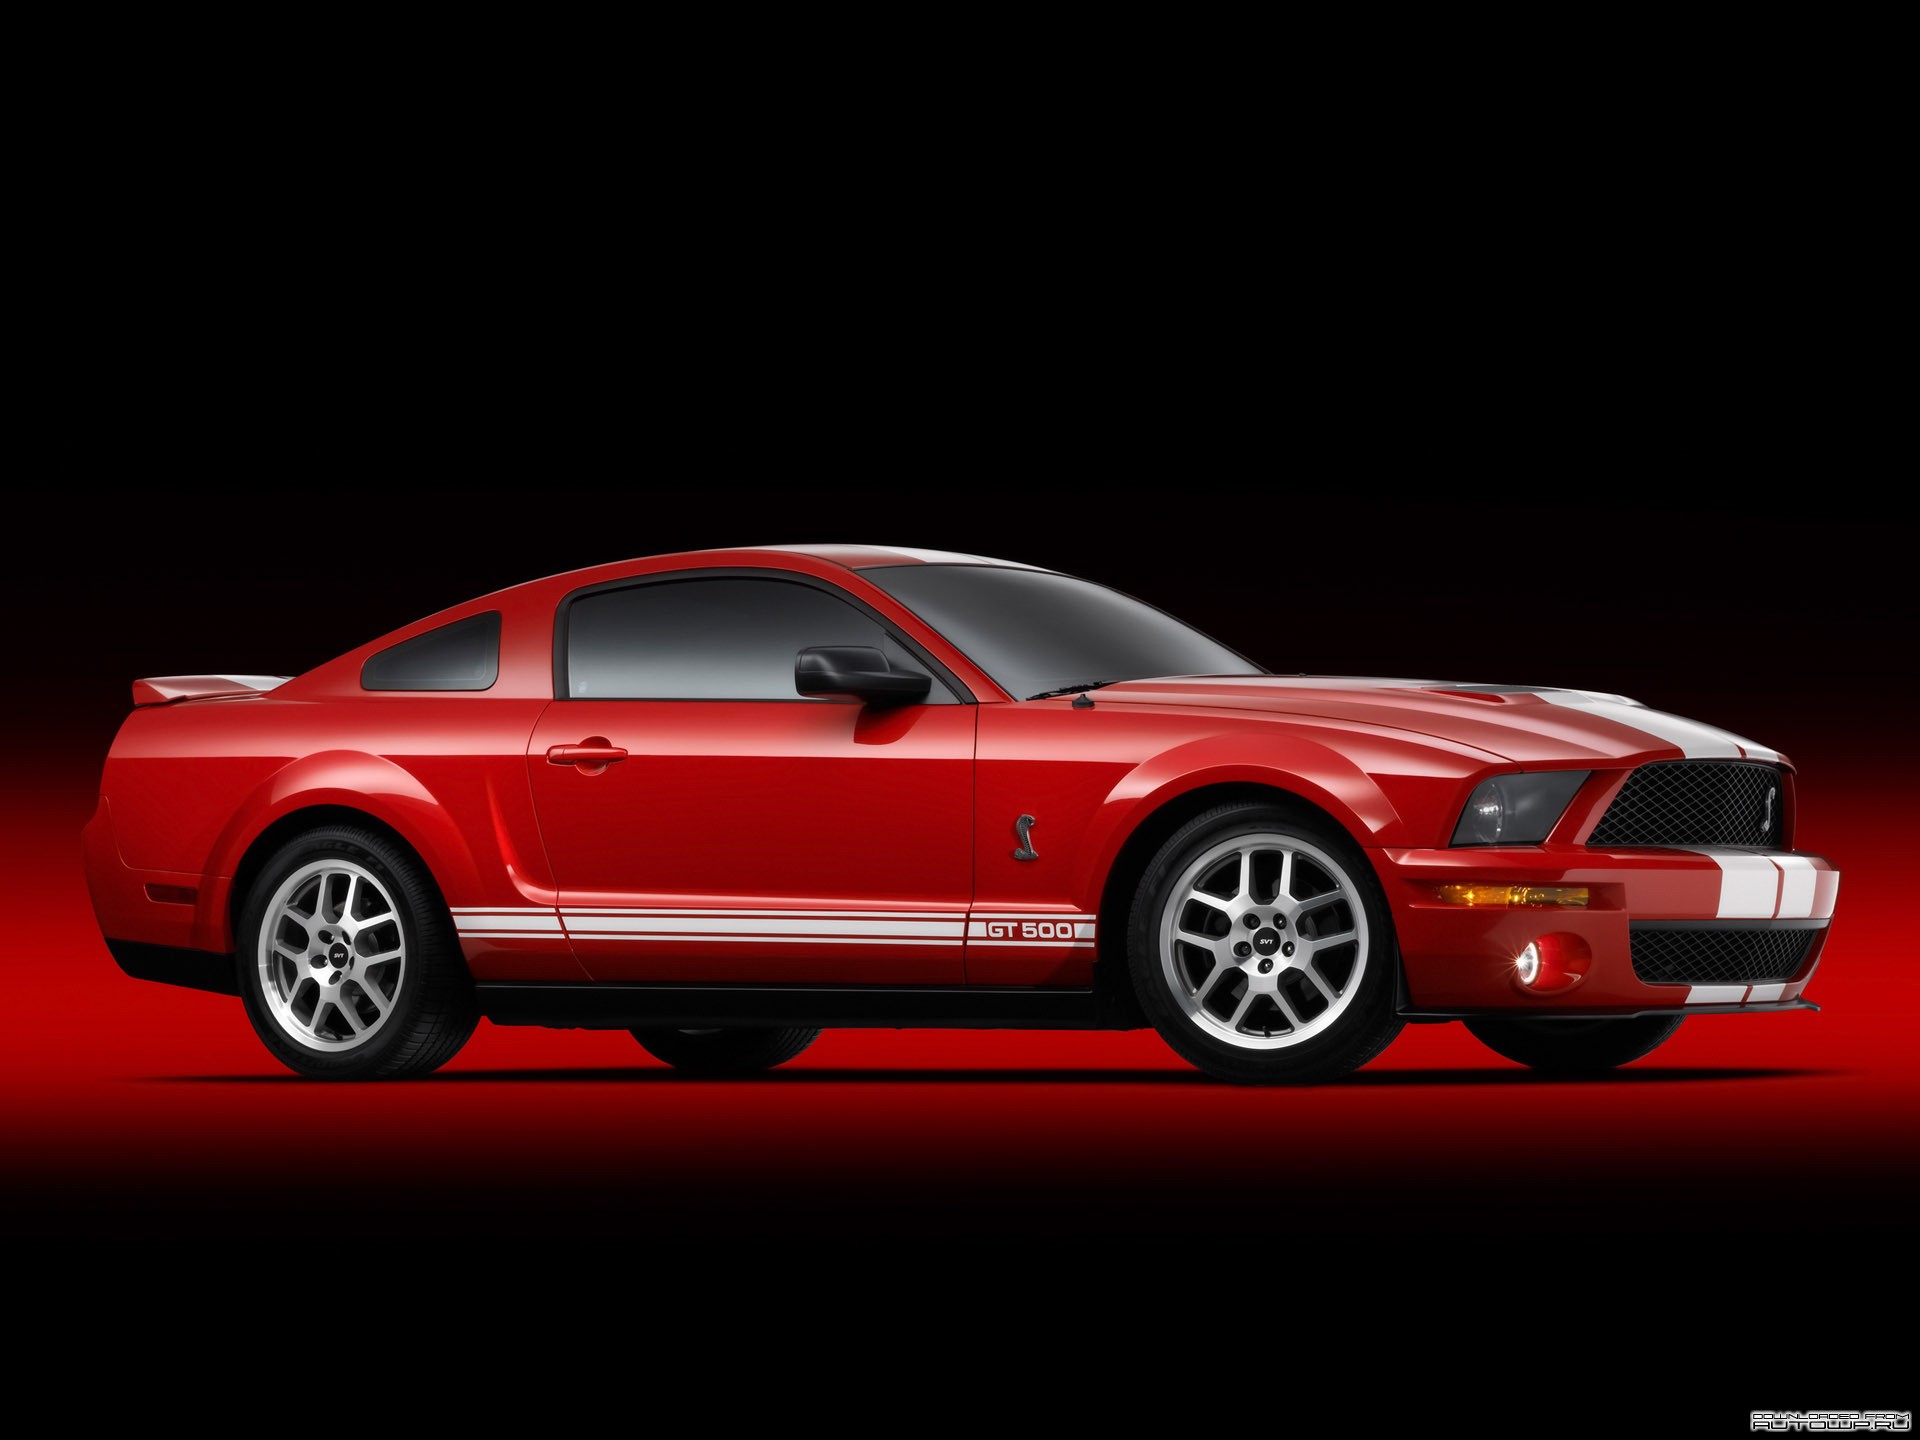 General 1920x1440 car vehicle red cars Ford Ford Mustang racing stripes Shelby Ford Mustang Shelby muscle cars American cars